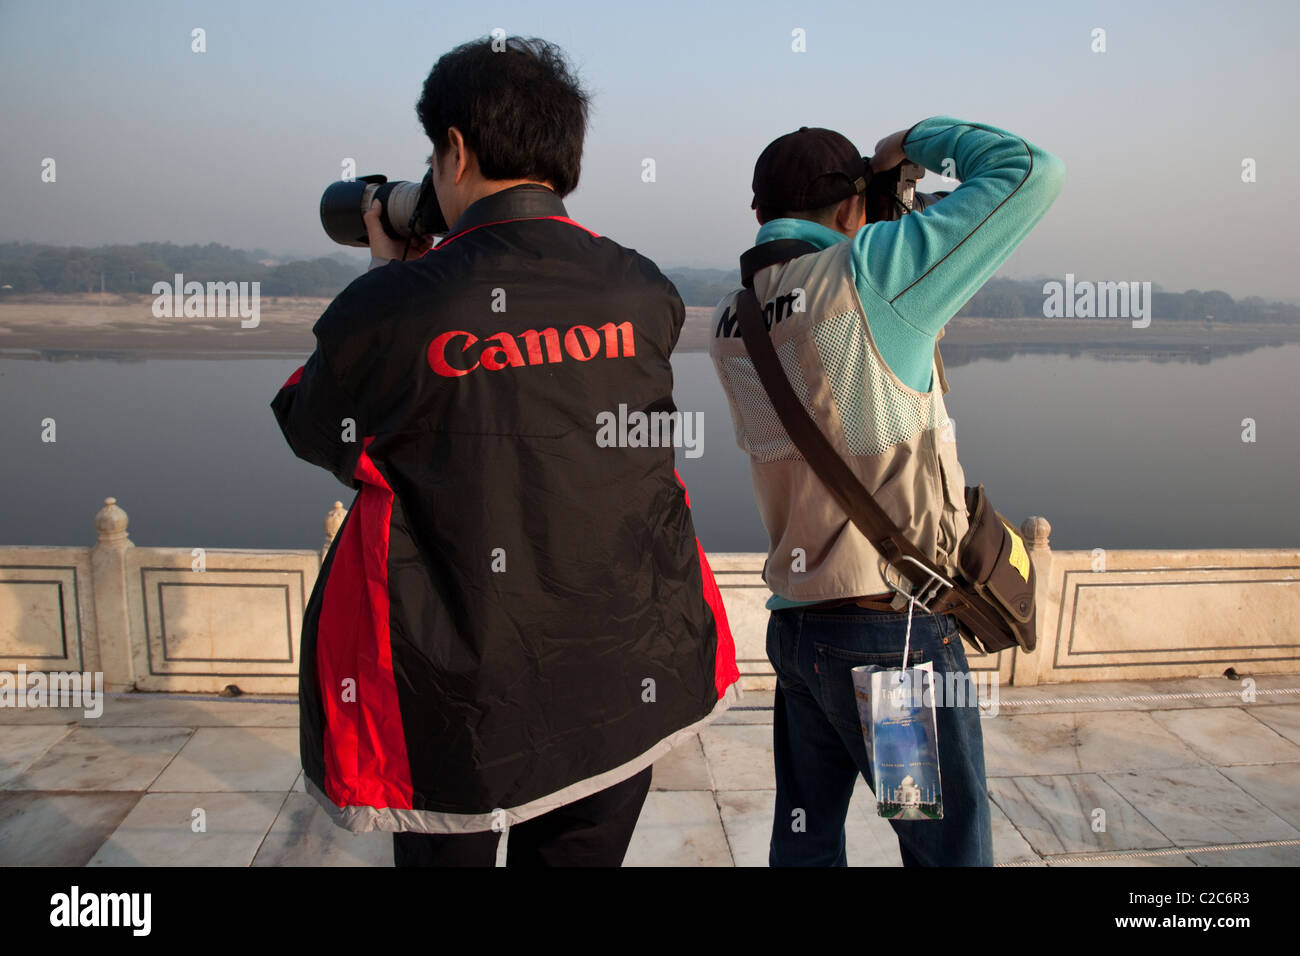 Chinese tourists wearing Canon and Nikon vests take pictures Yamuna river from Taj Mahal in Agra, India. Stock Photo